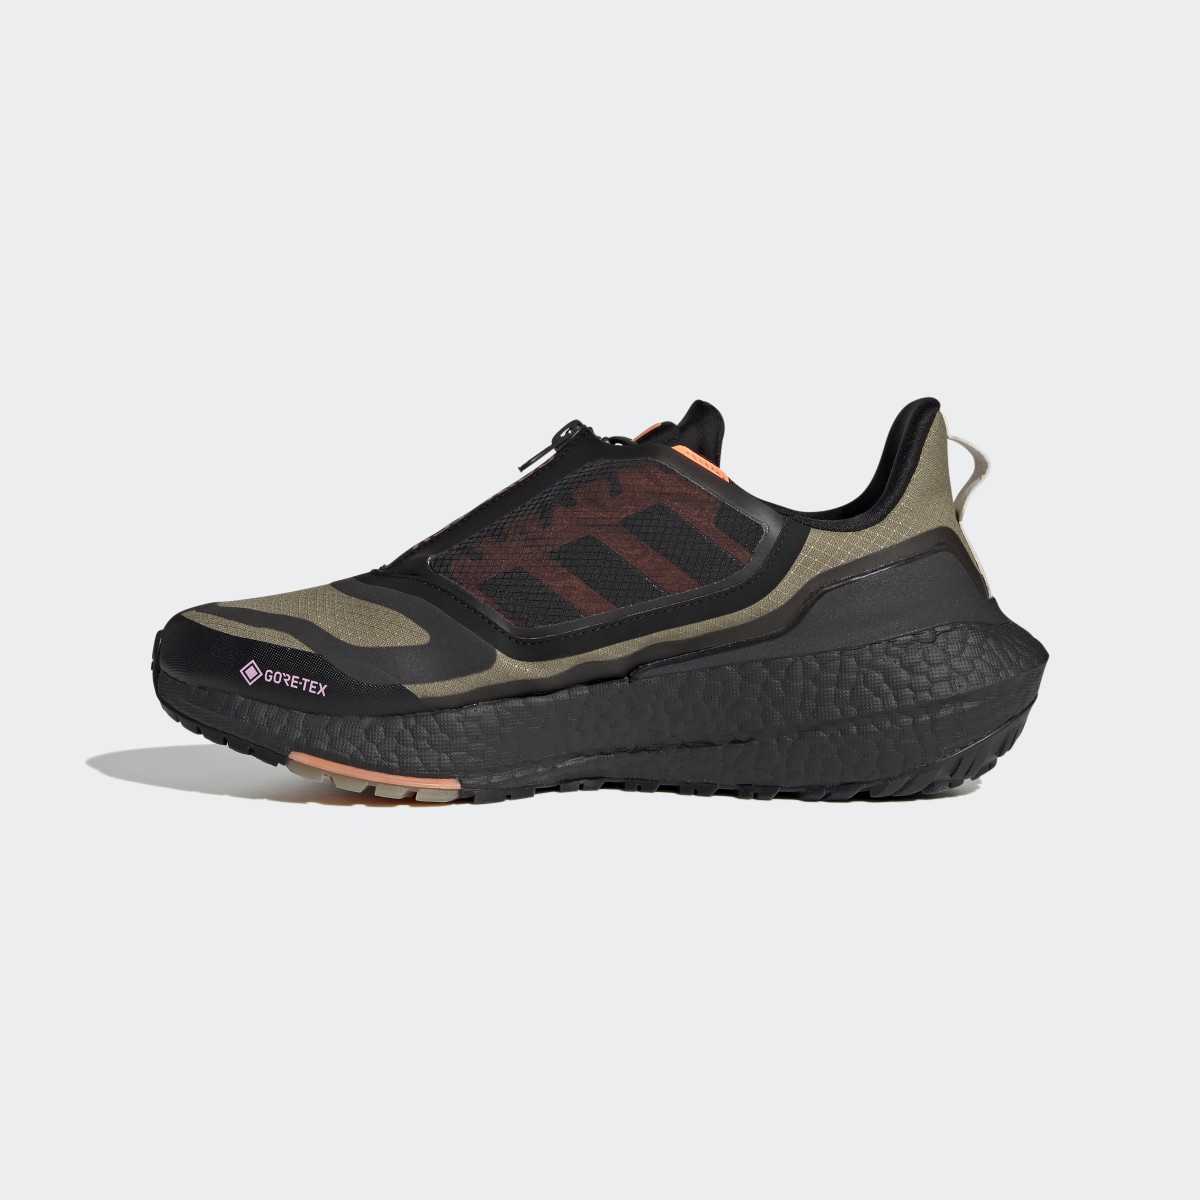 Adidas Ultraboost 22 GORE-TEX Shoes. 10